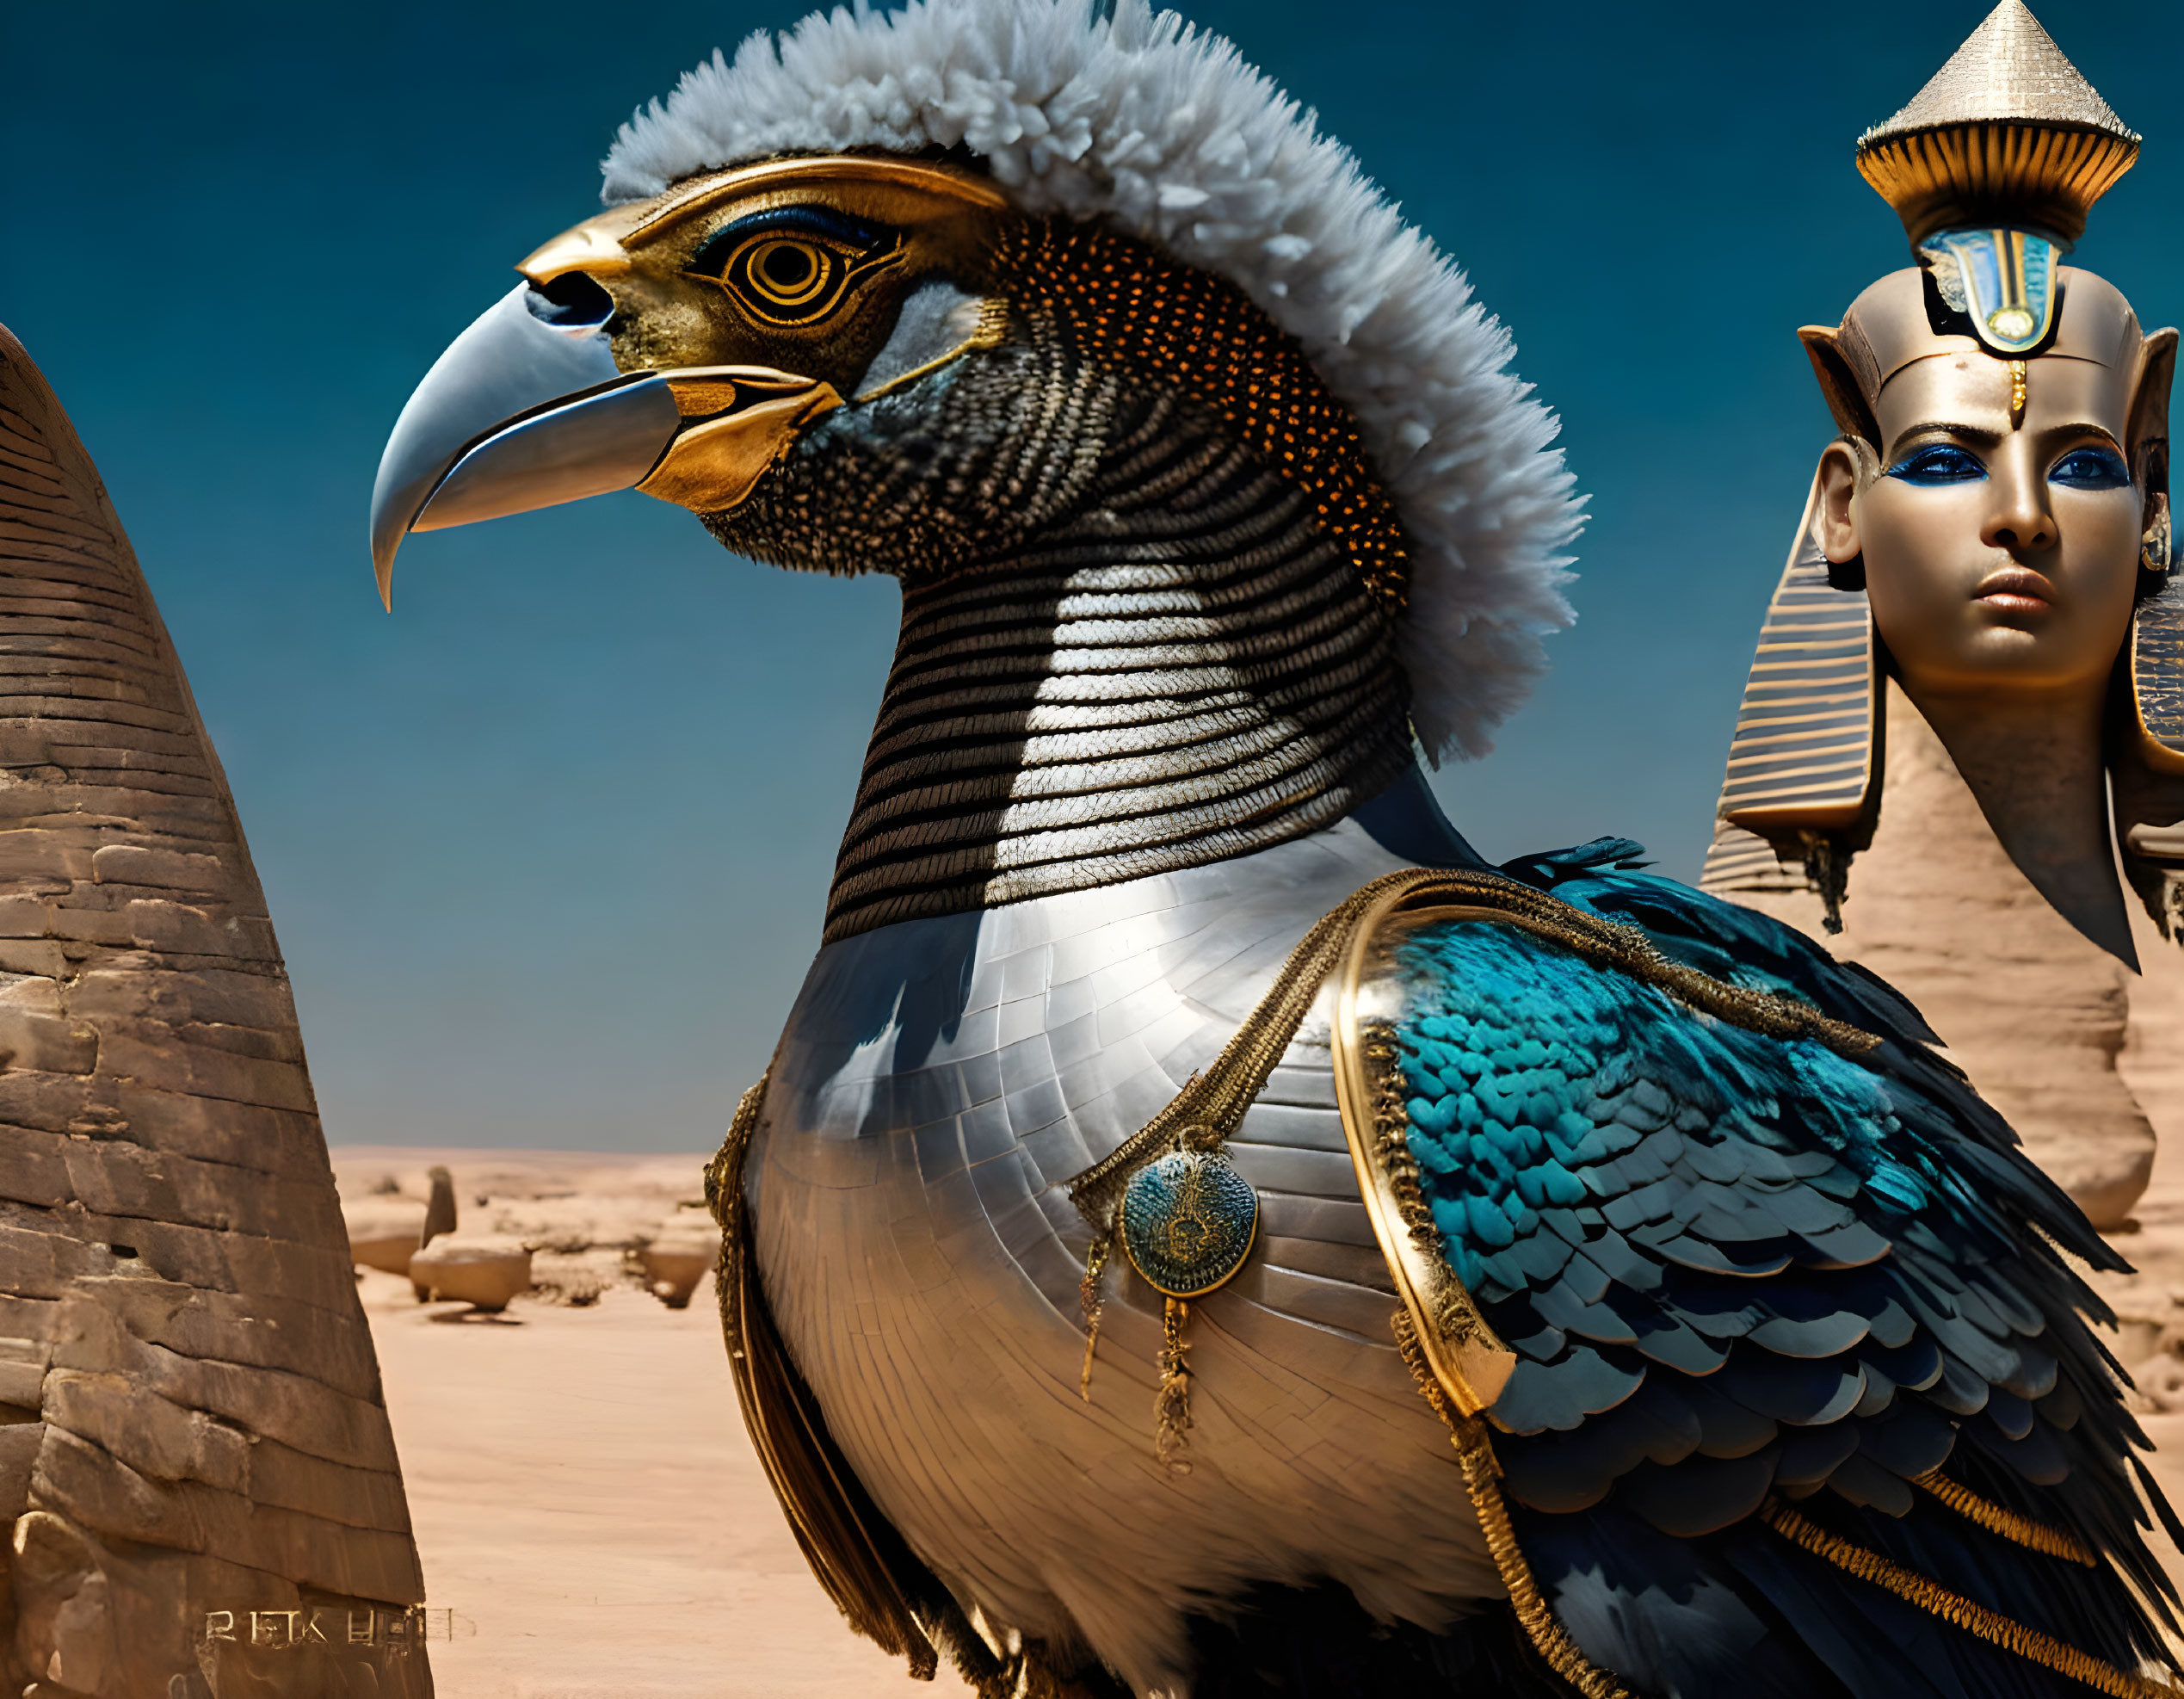 Anthropomorphic eagle in ancient Egyptian attire with woman figure and monument